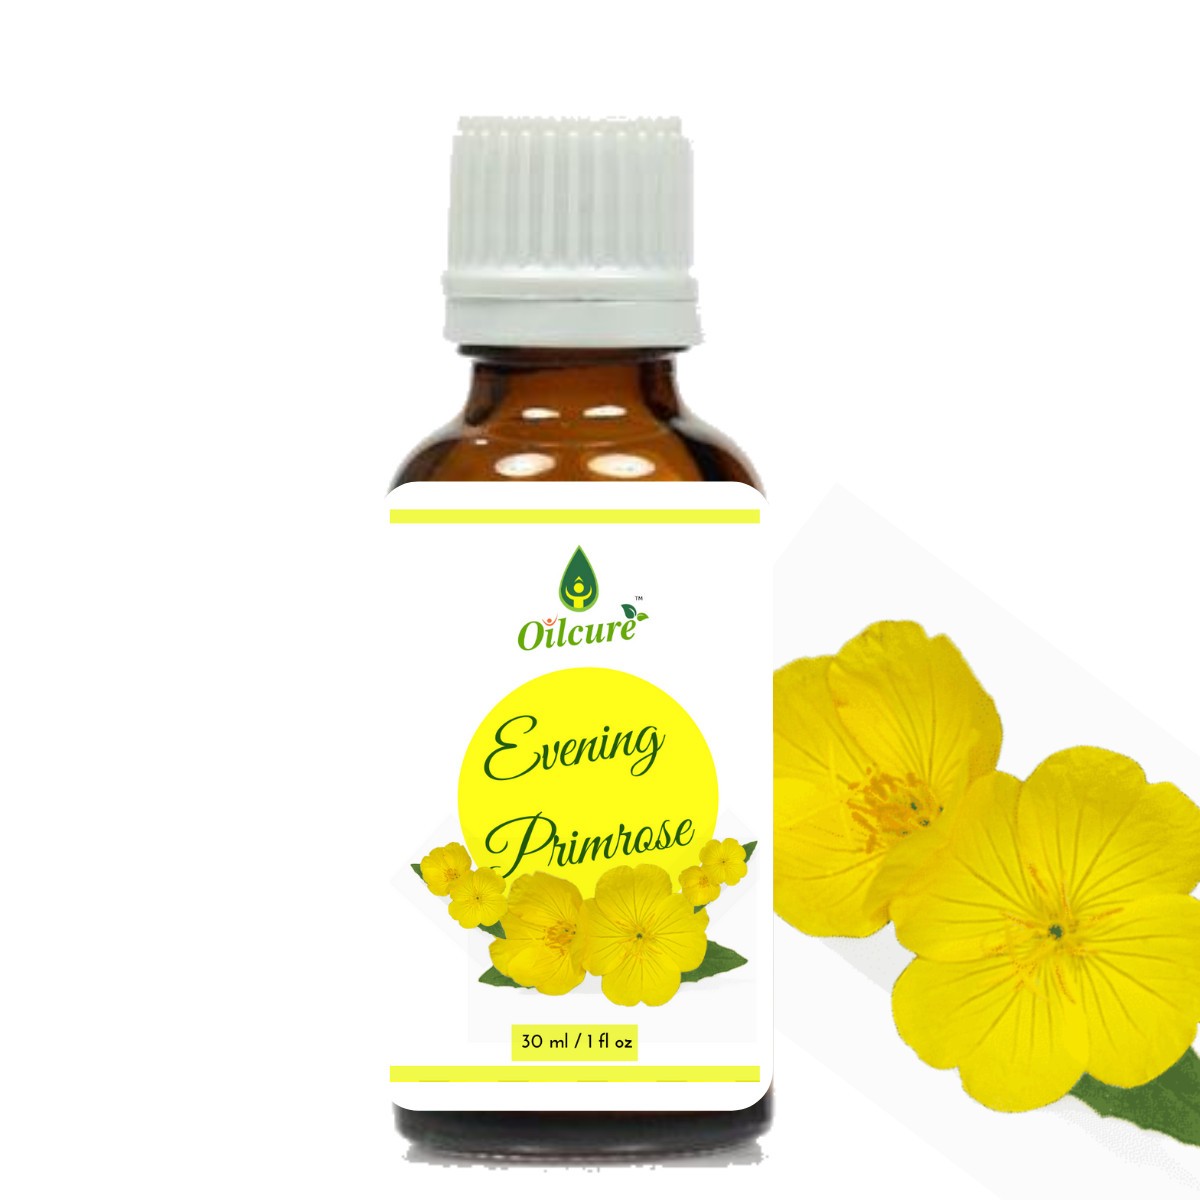  Evening primrose oil is a dietary supplement that is extracted from the seeds of the evening primrose plant